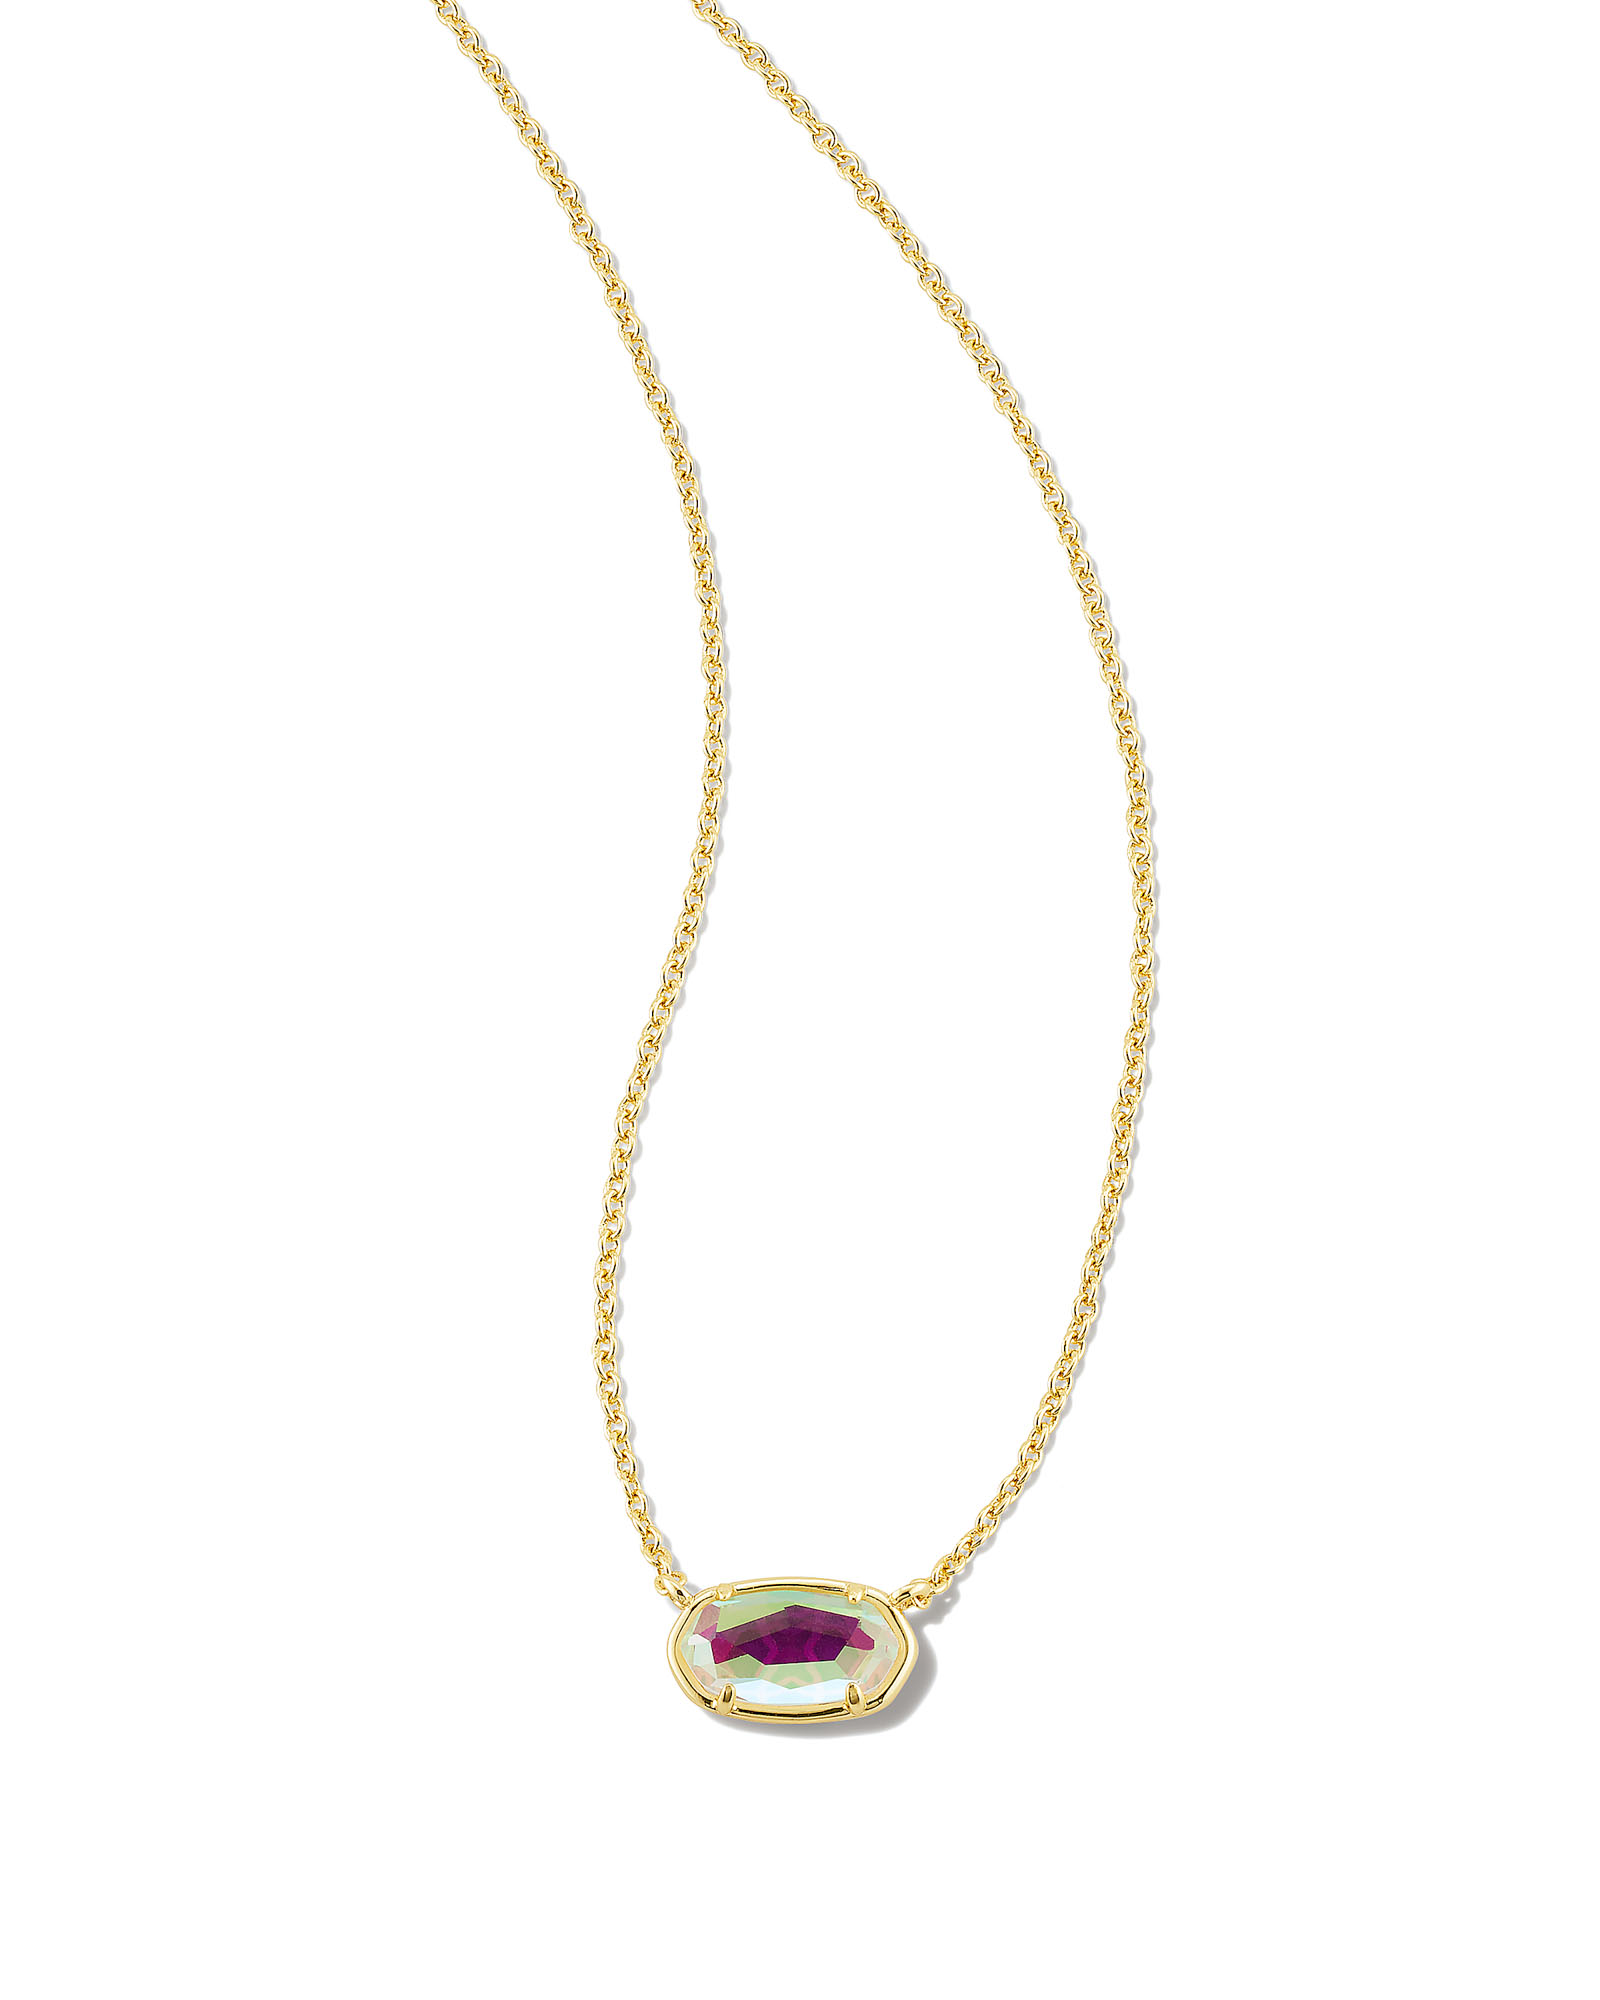 Ari Heart Gold Extended Length Pendant Necklace in Iridescent Drusy